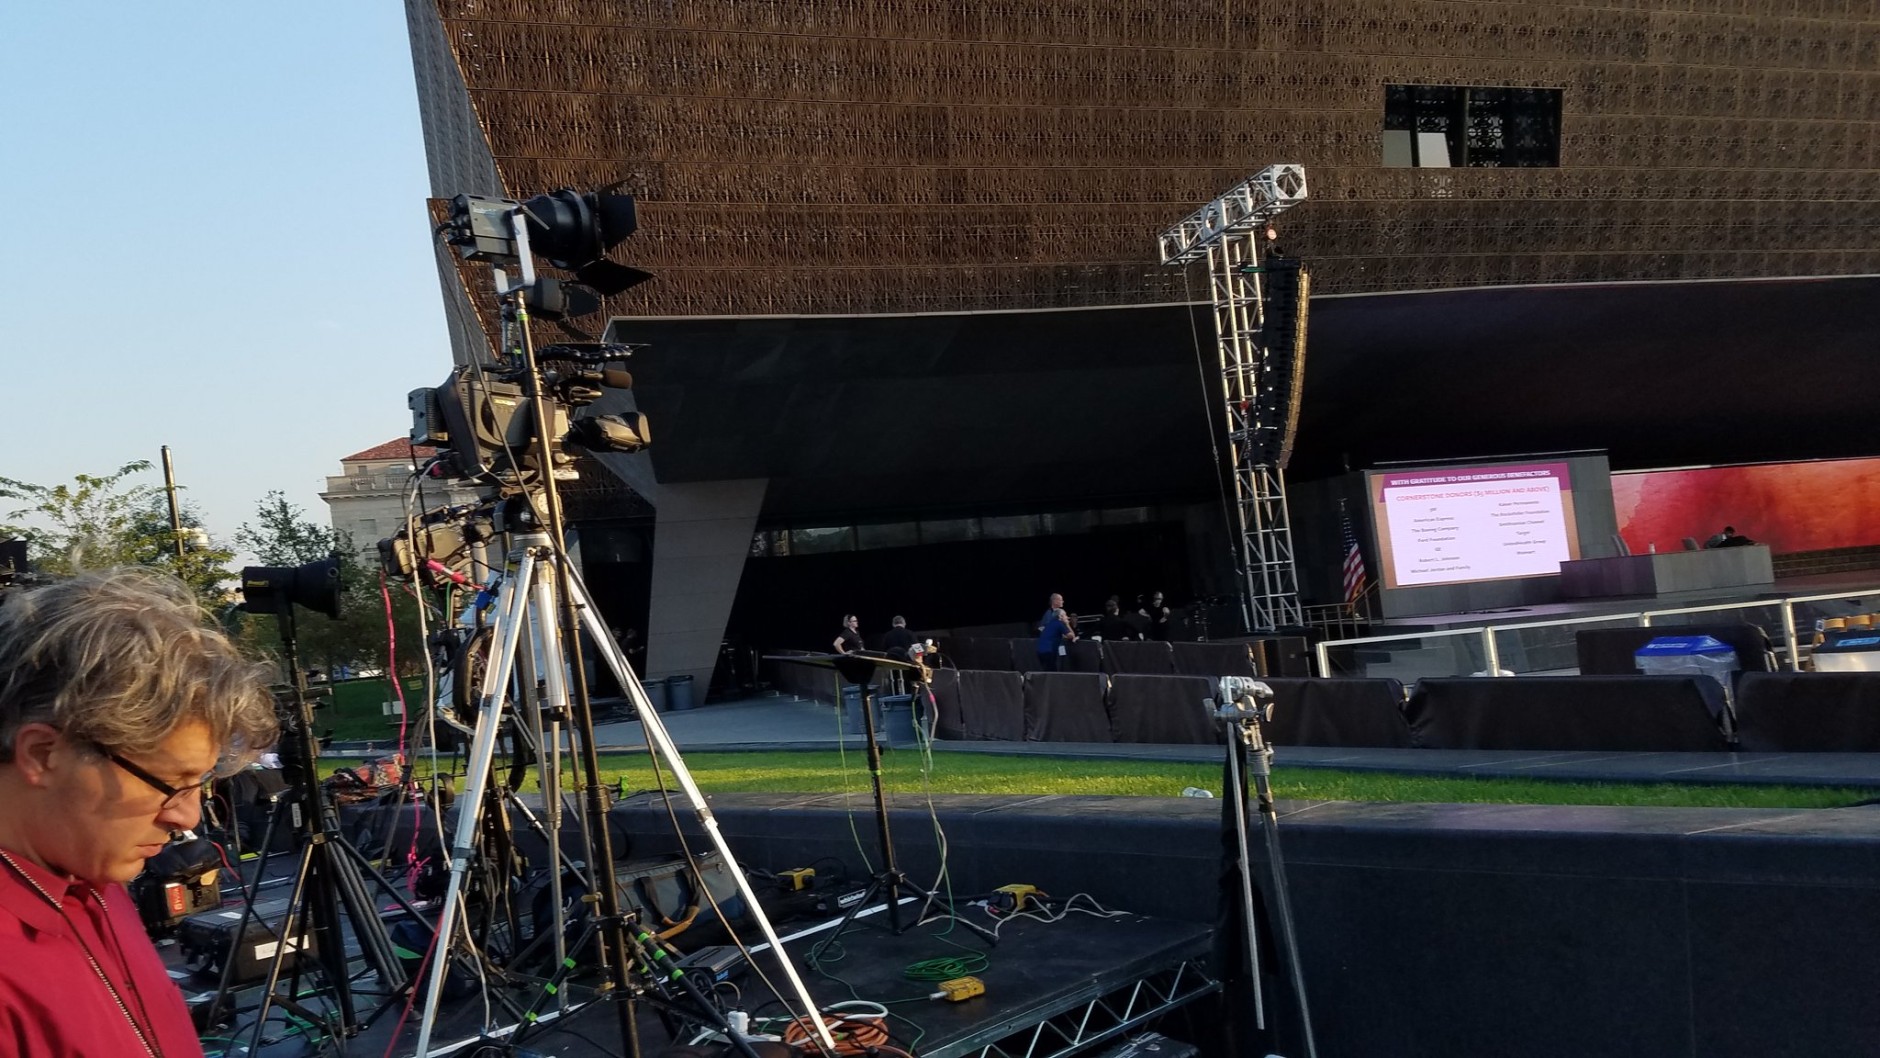 The media sets up for the opening event of the Smithsonian's National Museum of African American History and Culture. (WTOP/Allison Keyes)